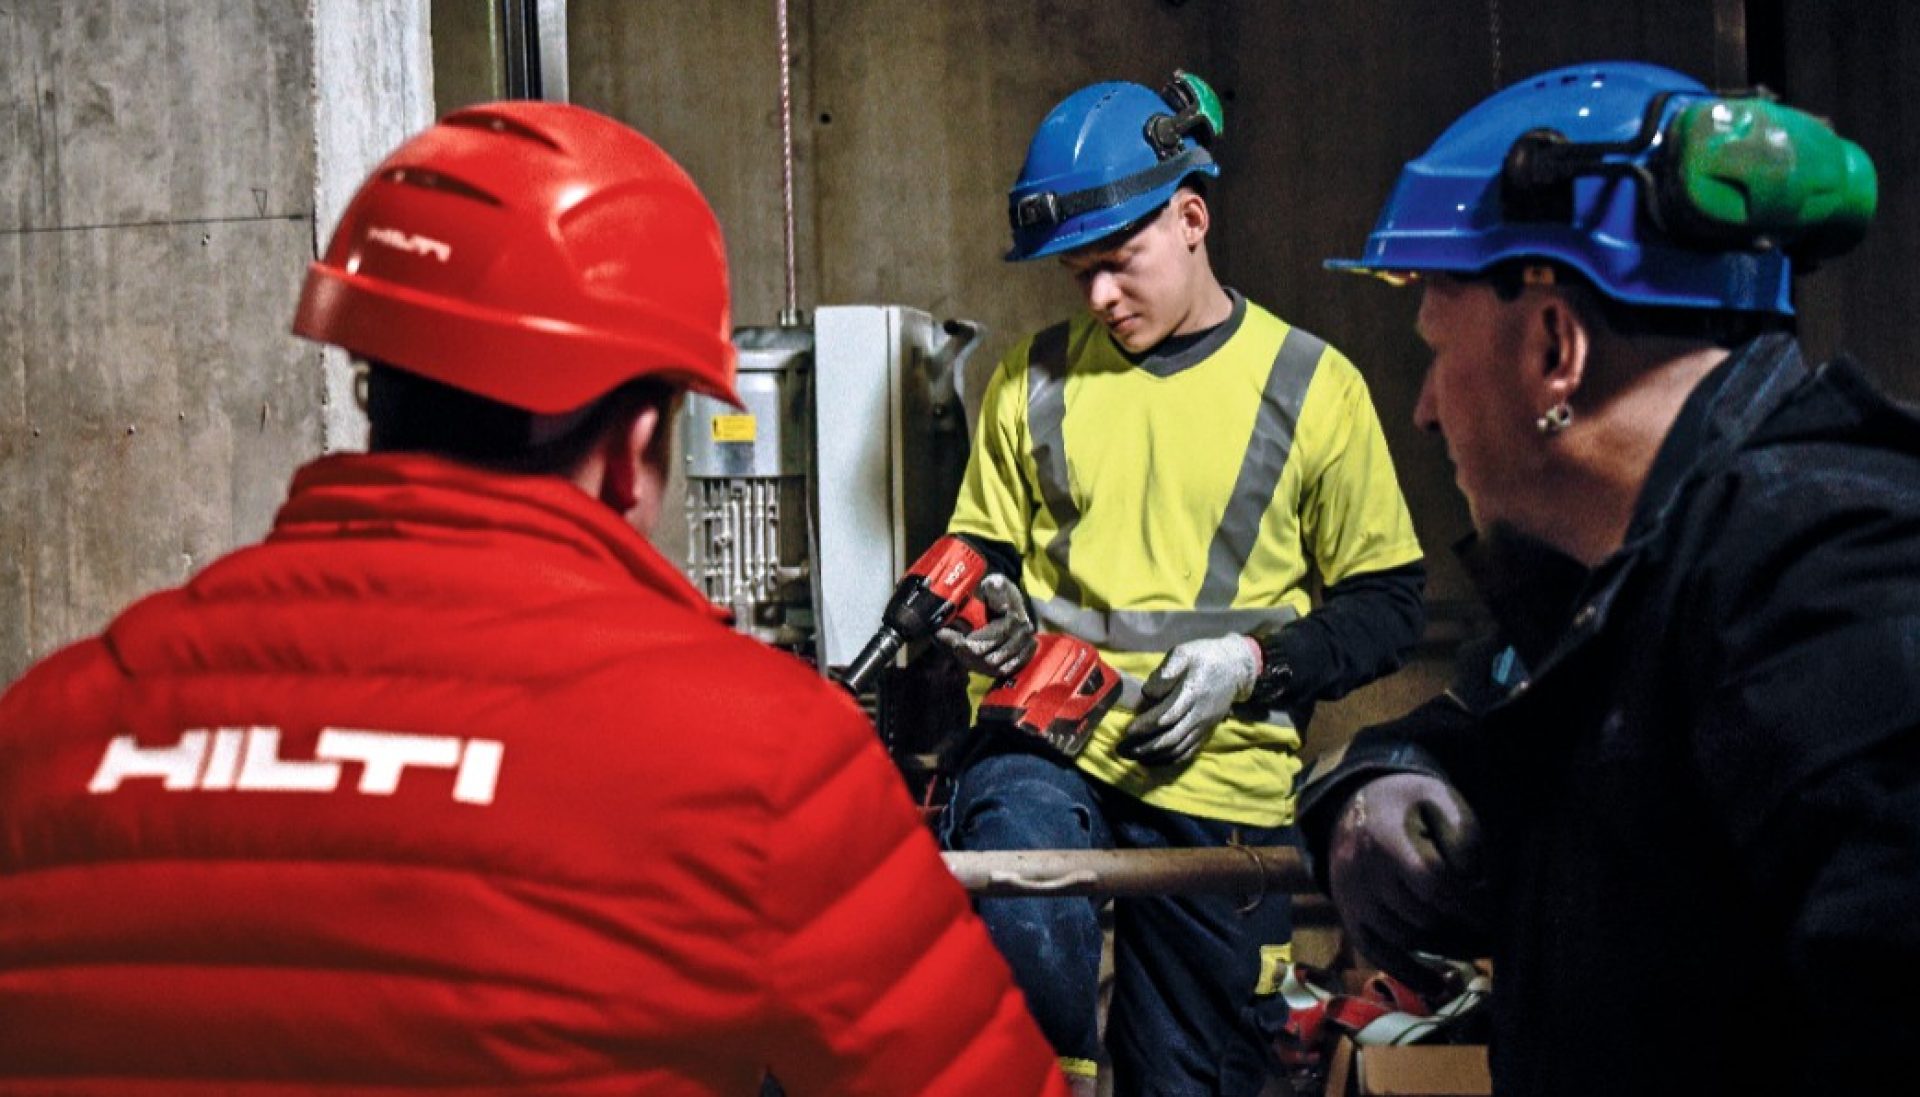 Hilti has over 75 years' experience in construction and we have designed ON!Track specifically for the industry.